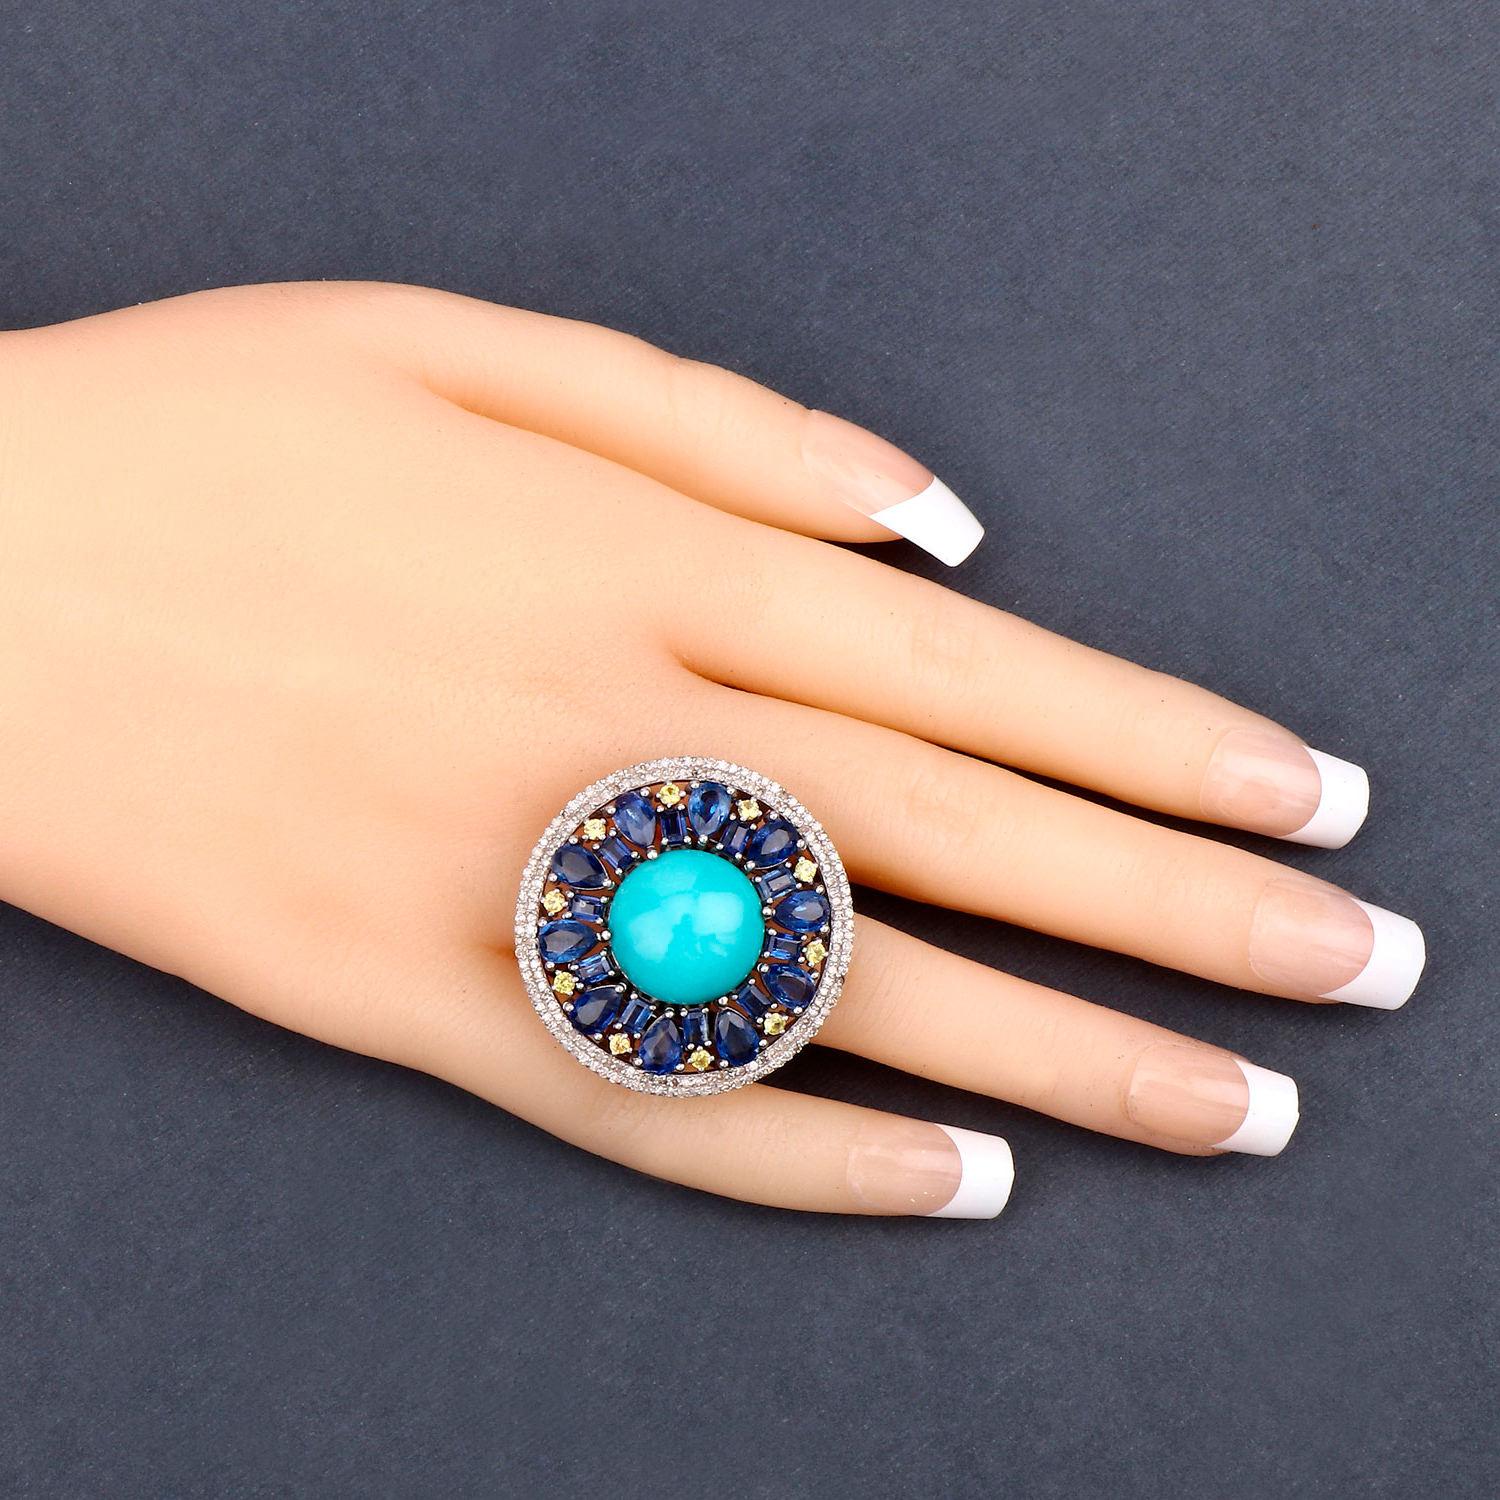 It comes with the Gemological Appraisal by GIA GG/AJP
All Gemstones are Natural in Origin
Gemstones: Turquoise, Kyanites, Diamonds, Lemon Quartz
Total Carat Weight: 18 Carats
Metal: Black Rhodium Plated Silver
Ring Diameter: 33 mm
Ring Size: 7.25*